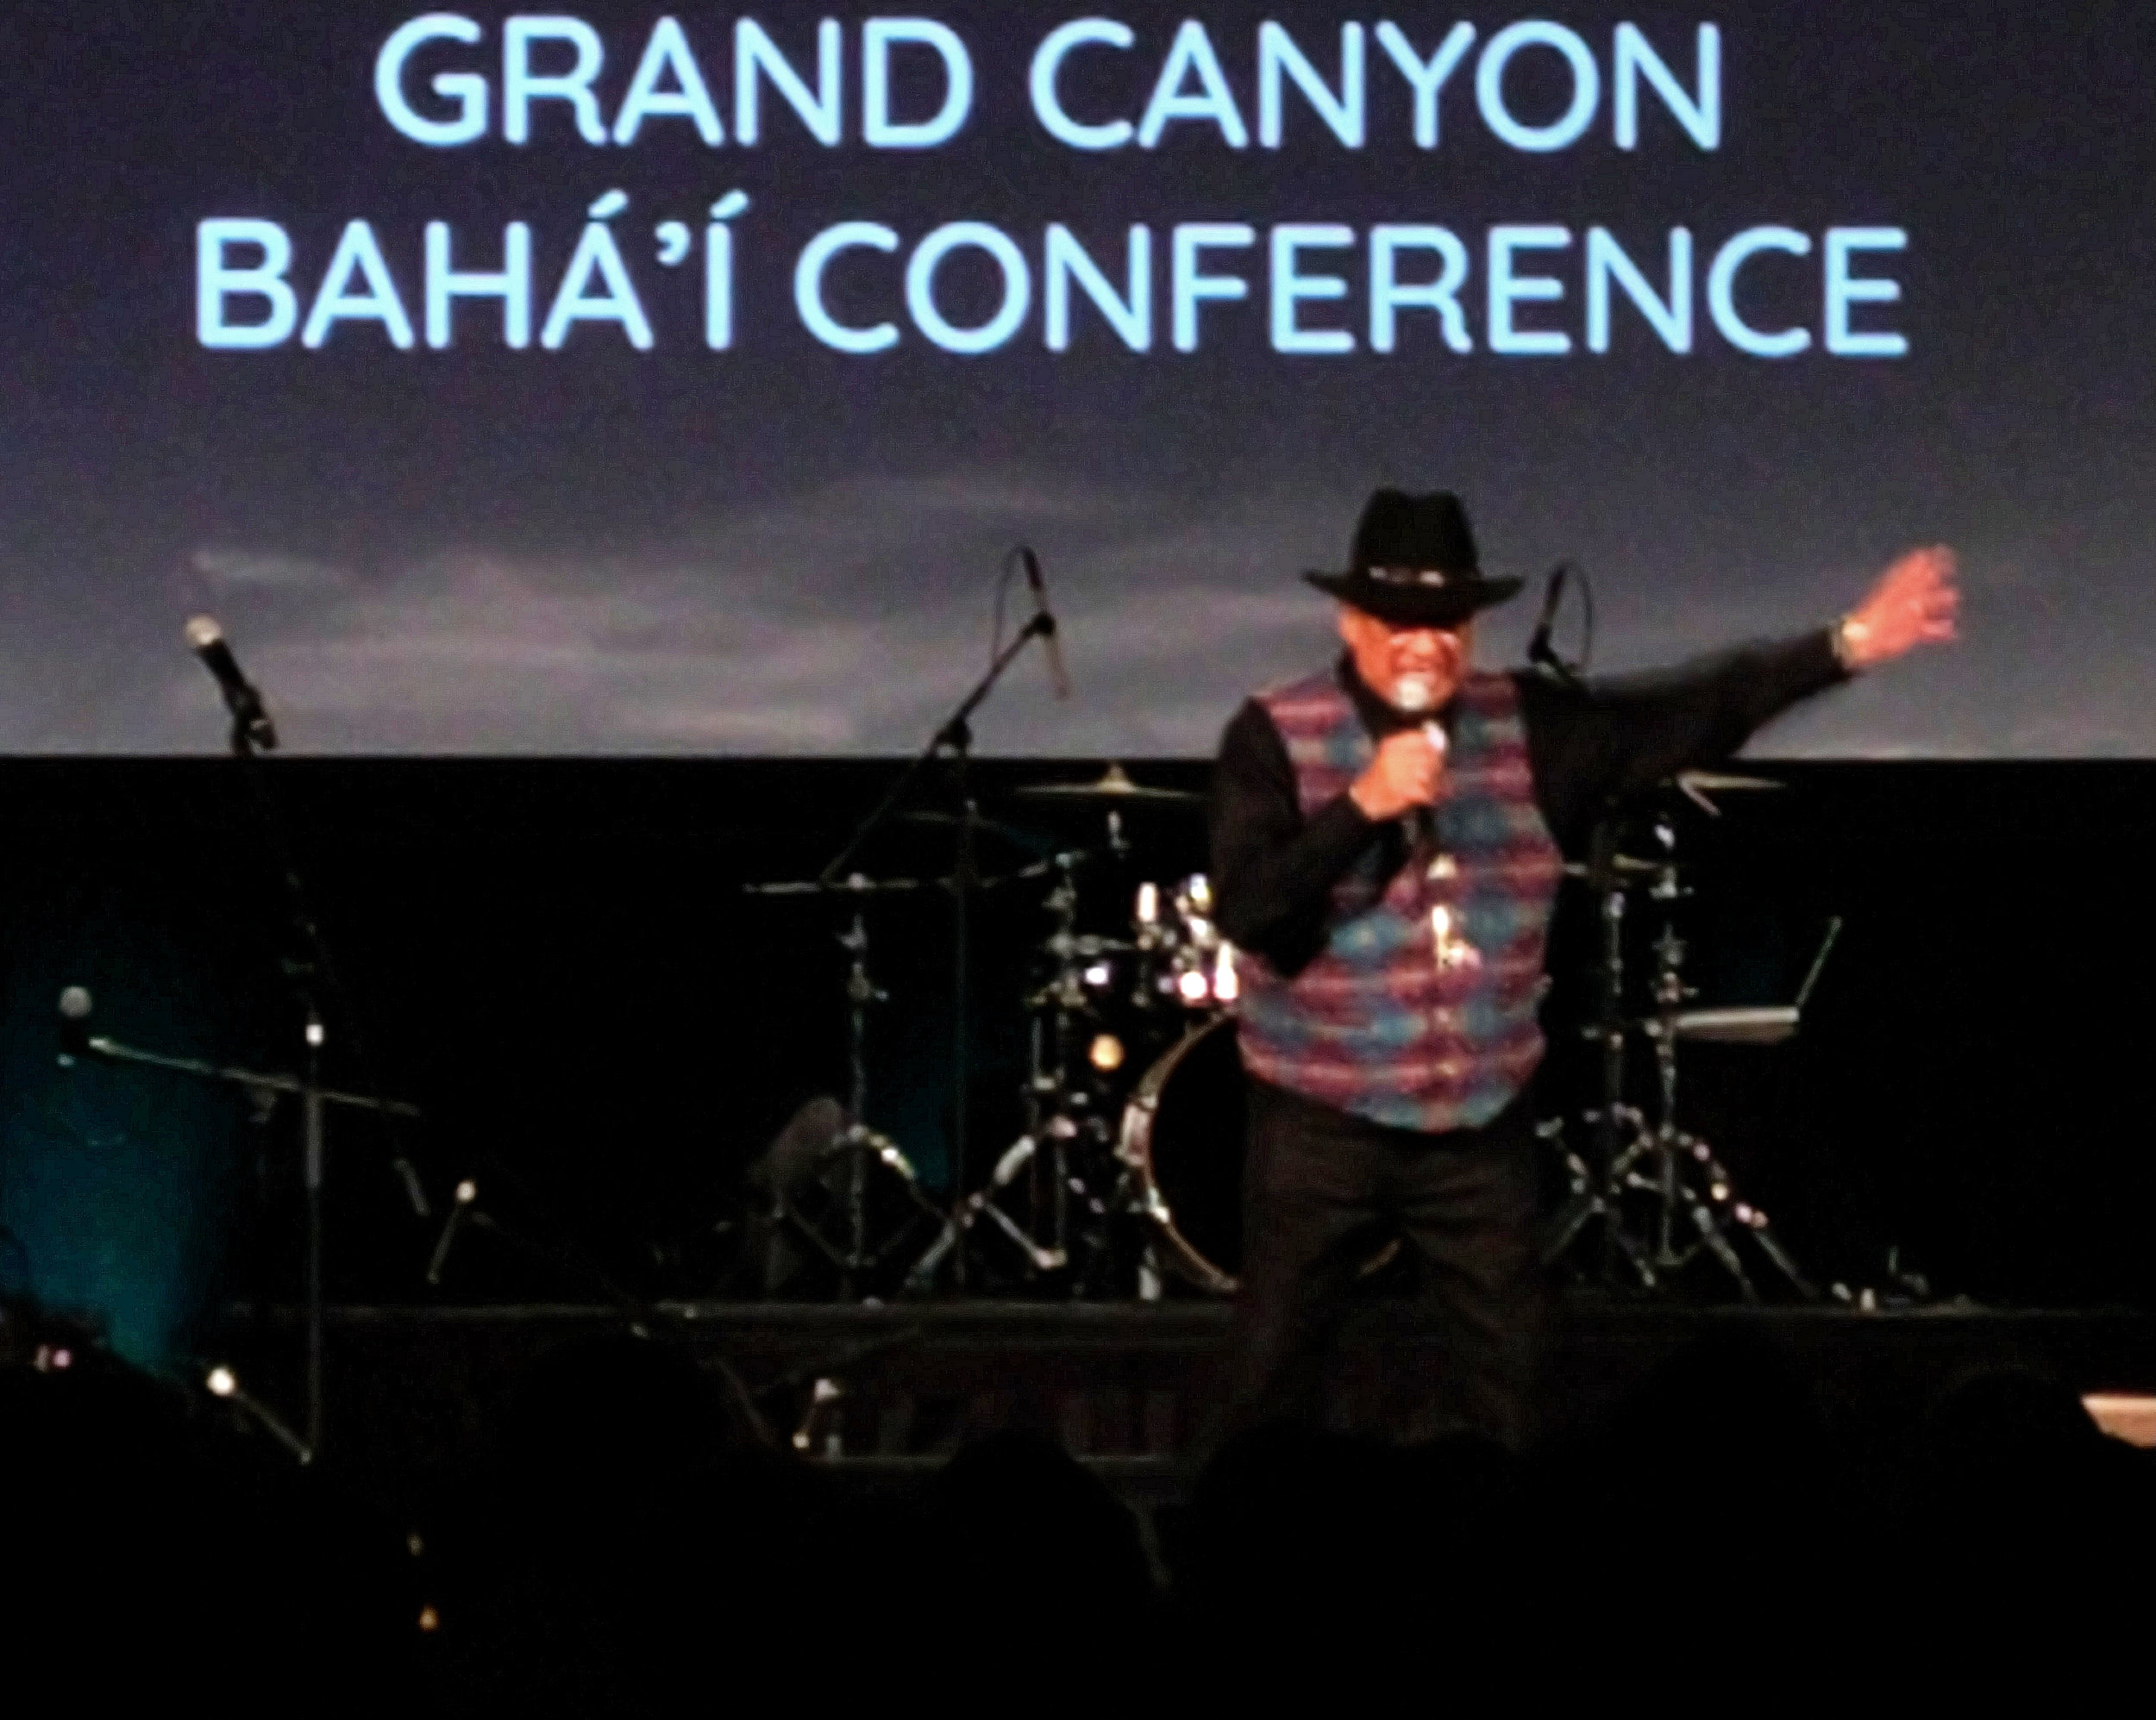 Chandler Family Grand Canyon Conference